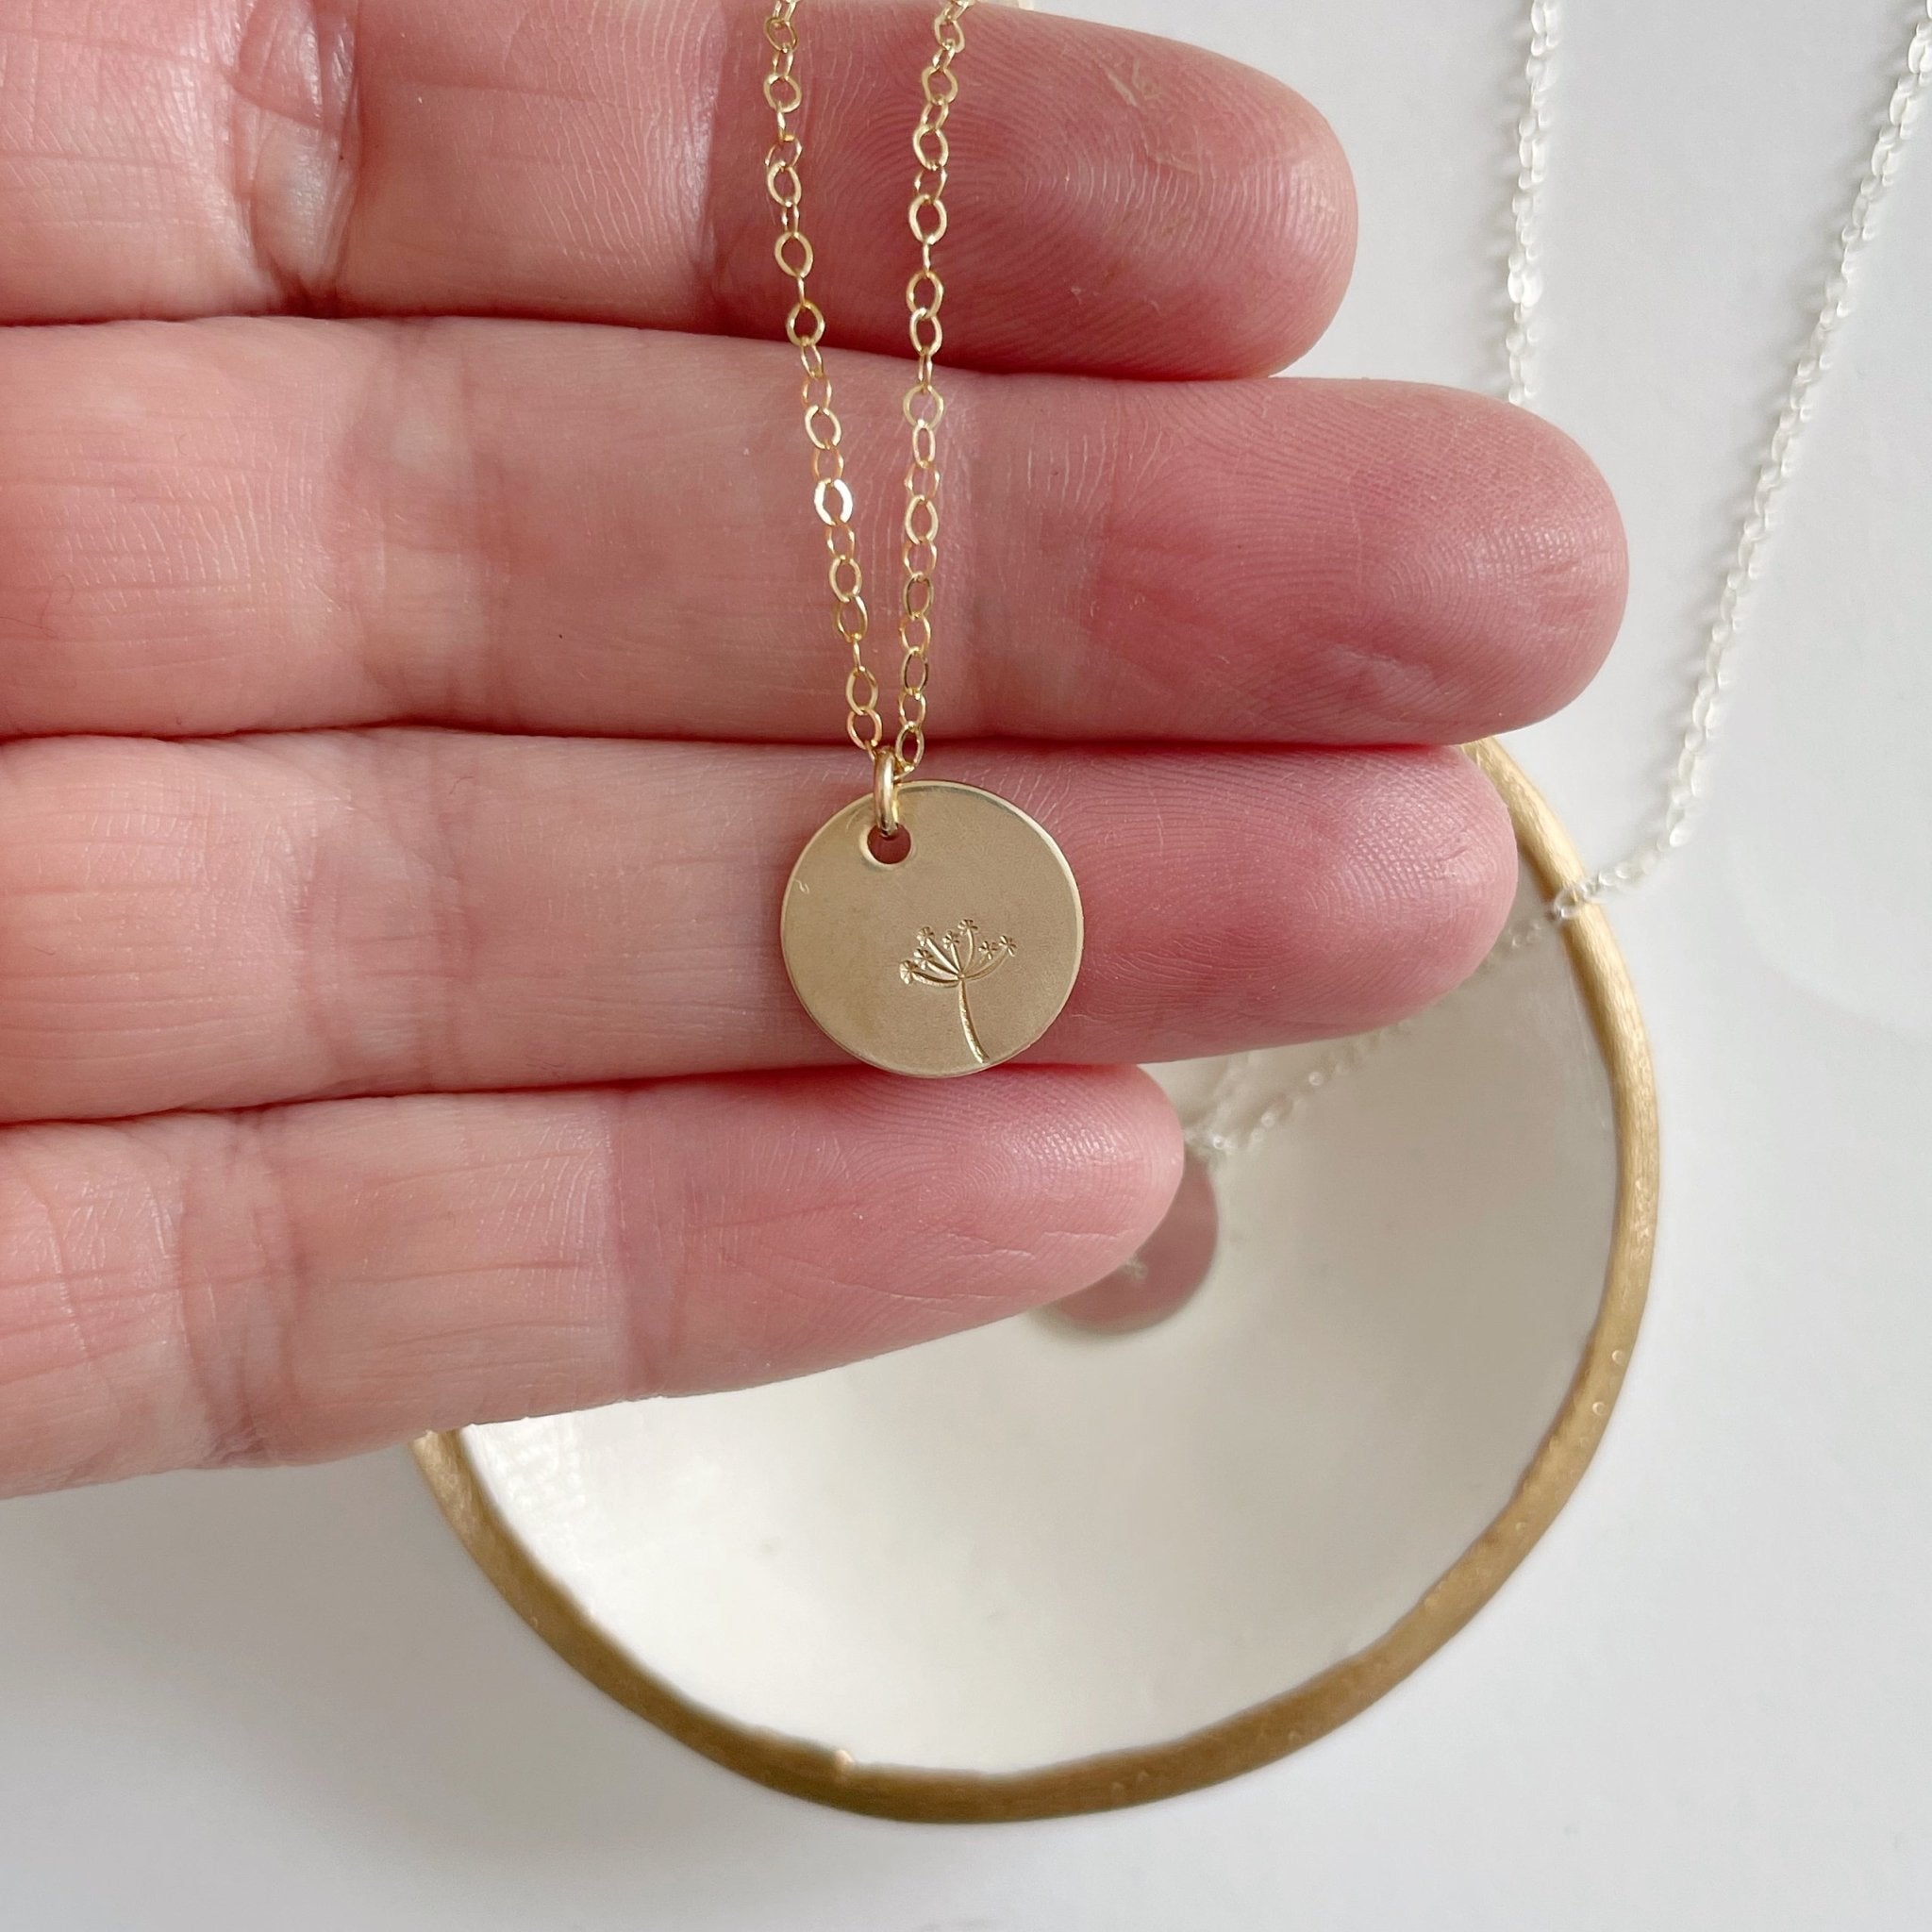 Hand holding gold stamped disc dandelion seed miscarriage necklace. Seeds of Hope Necklace by Sarah Cornwell Jewelry